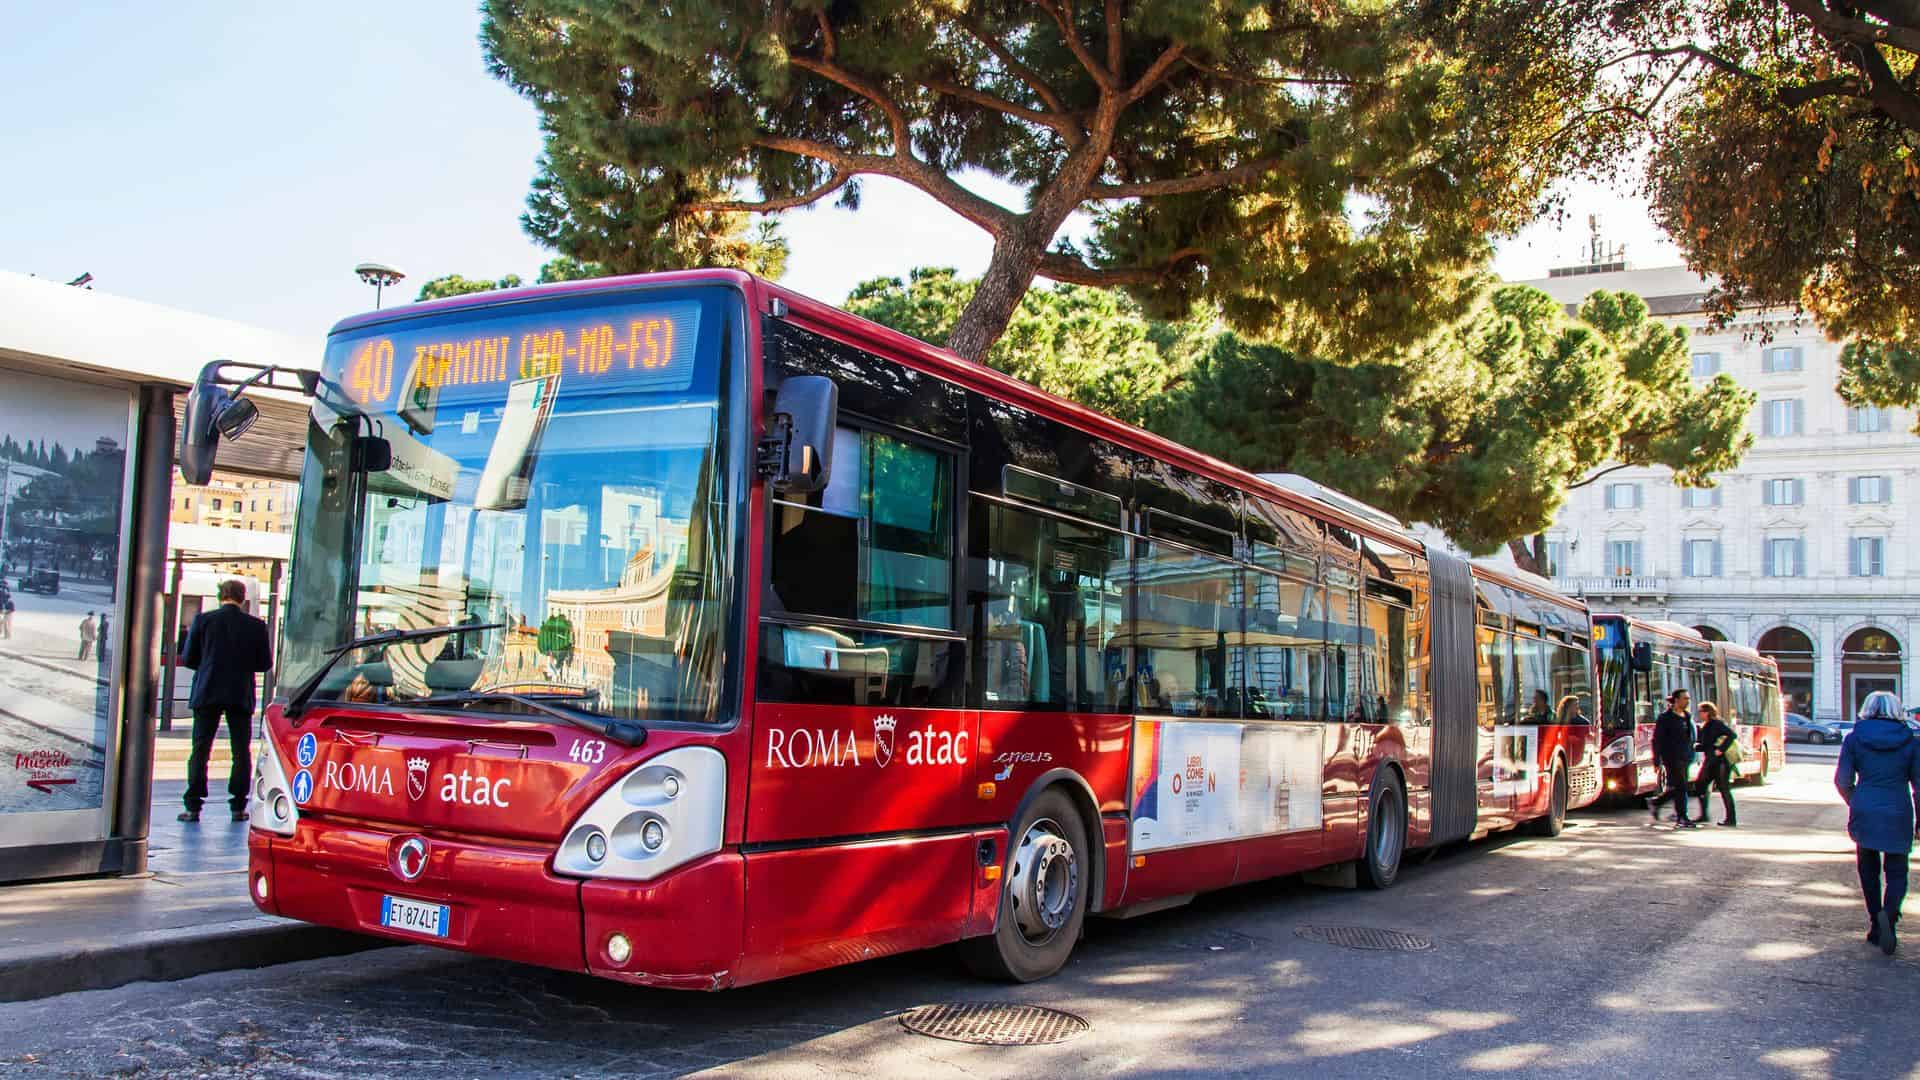 Bus in Rome goes down a beautiful street in a historical part of the city